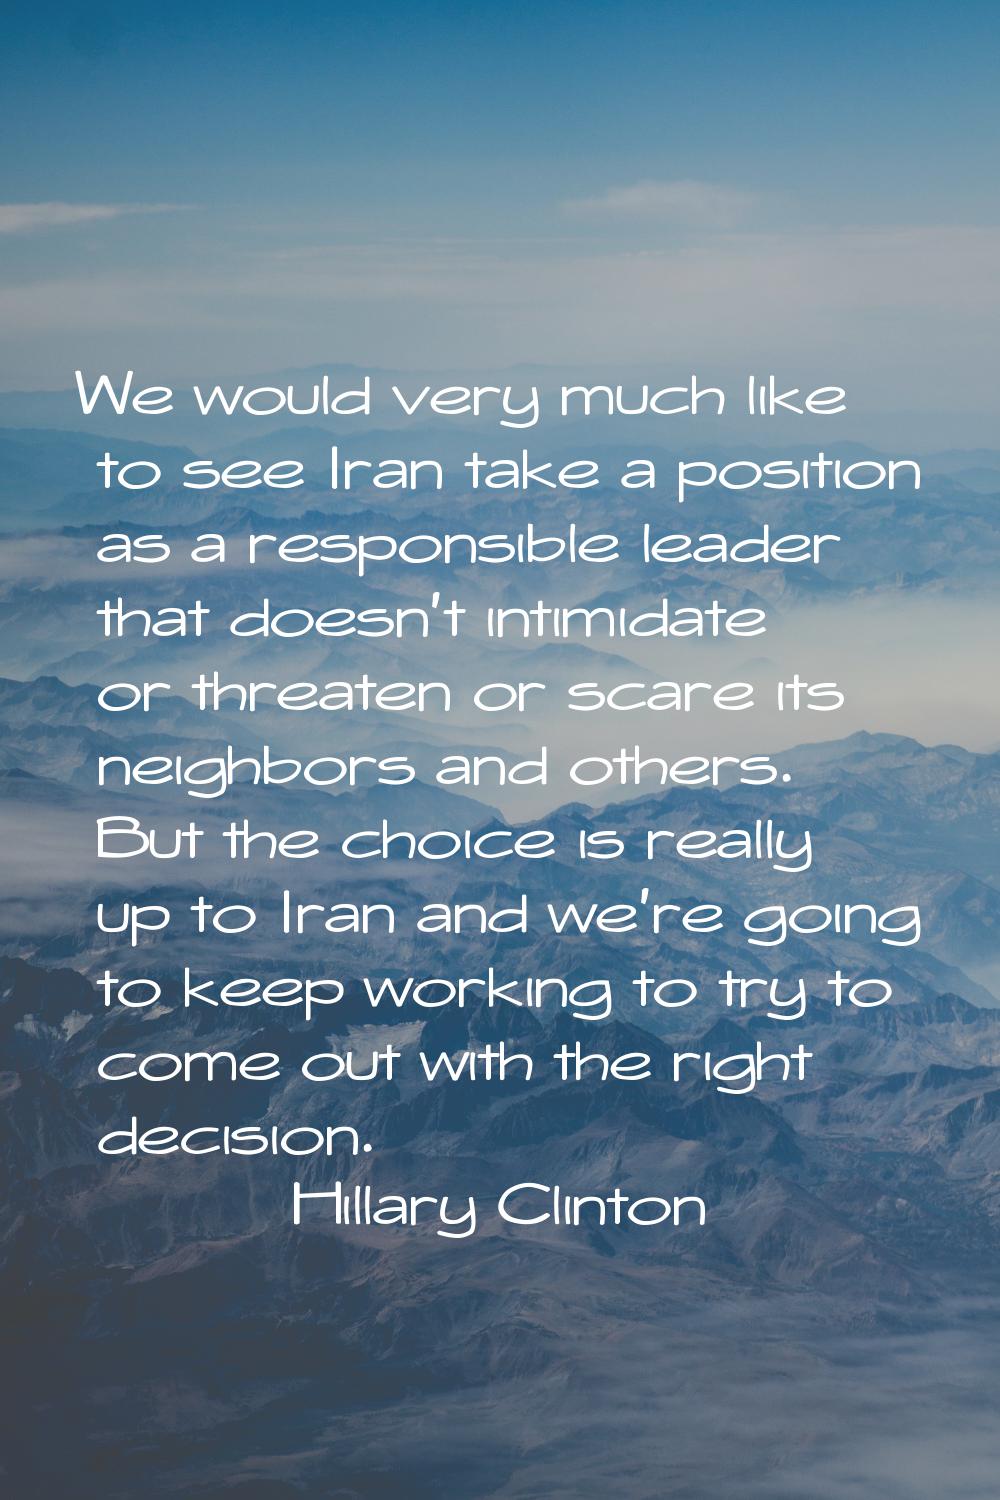 We would very much like to see Iran take a position as a responsible leader that doesn't intimidate